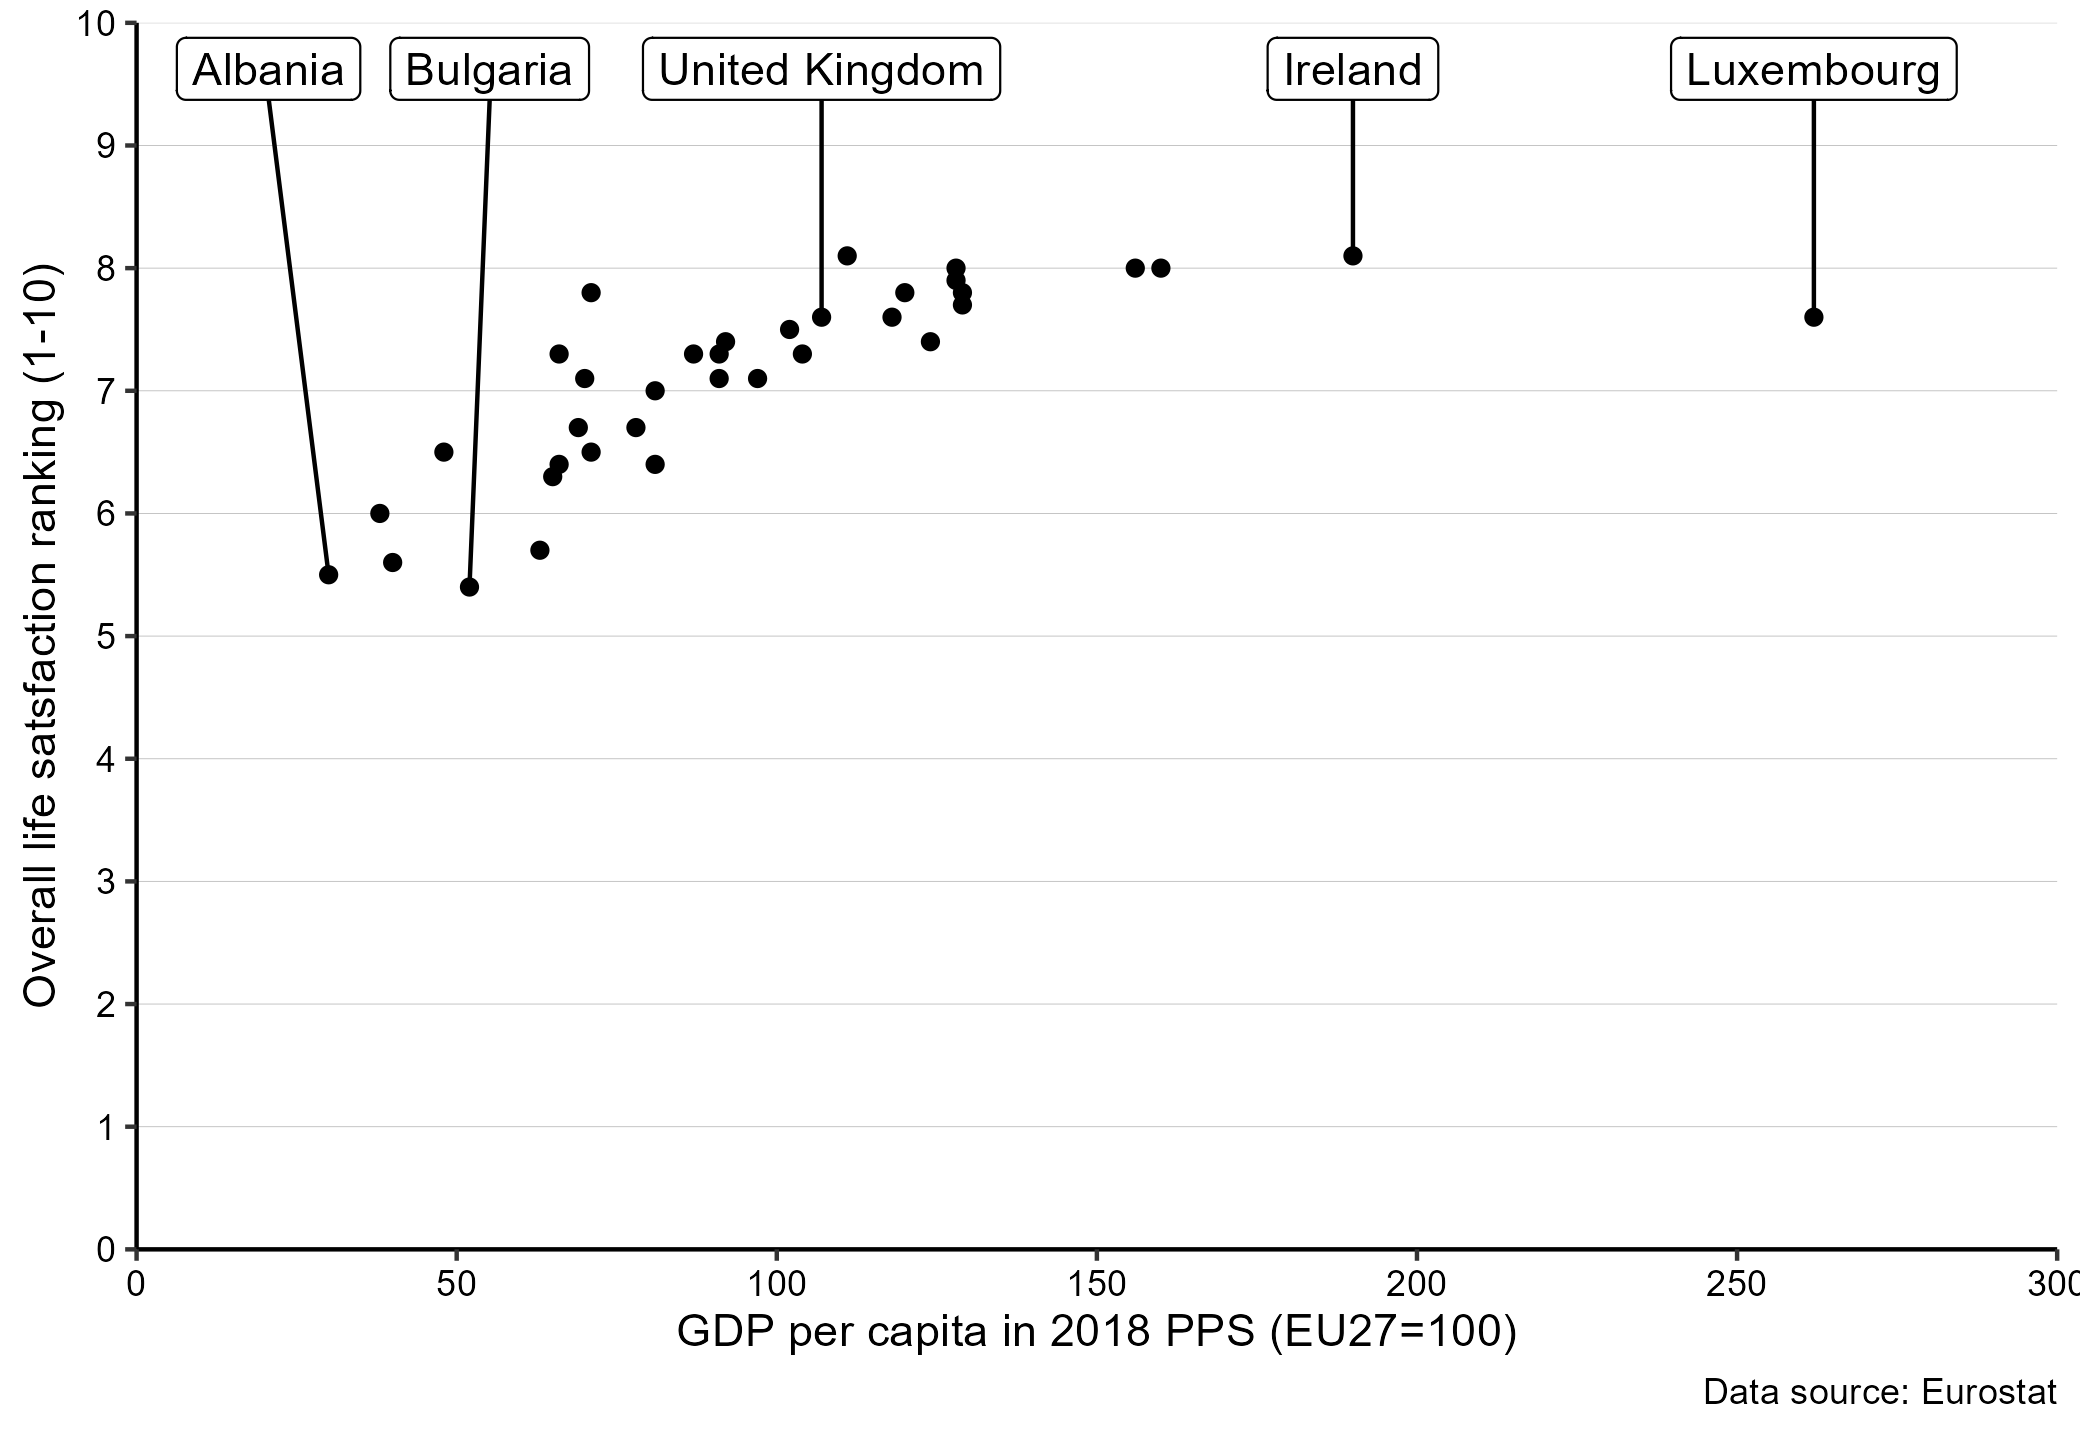 GDP per capita and subjective wellbeing in 2018 Source: Eurostat 